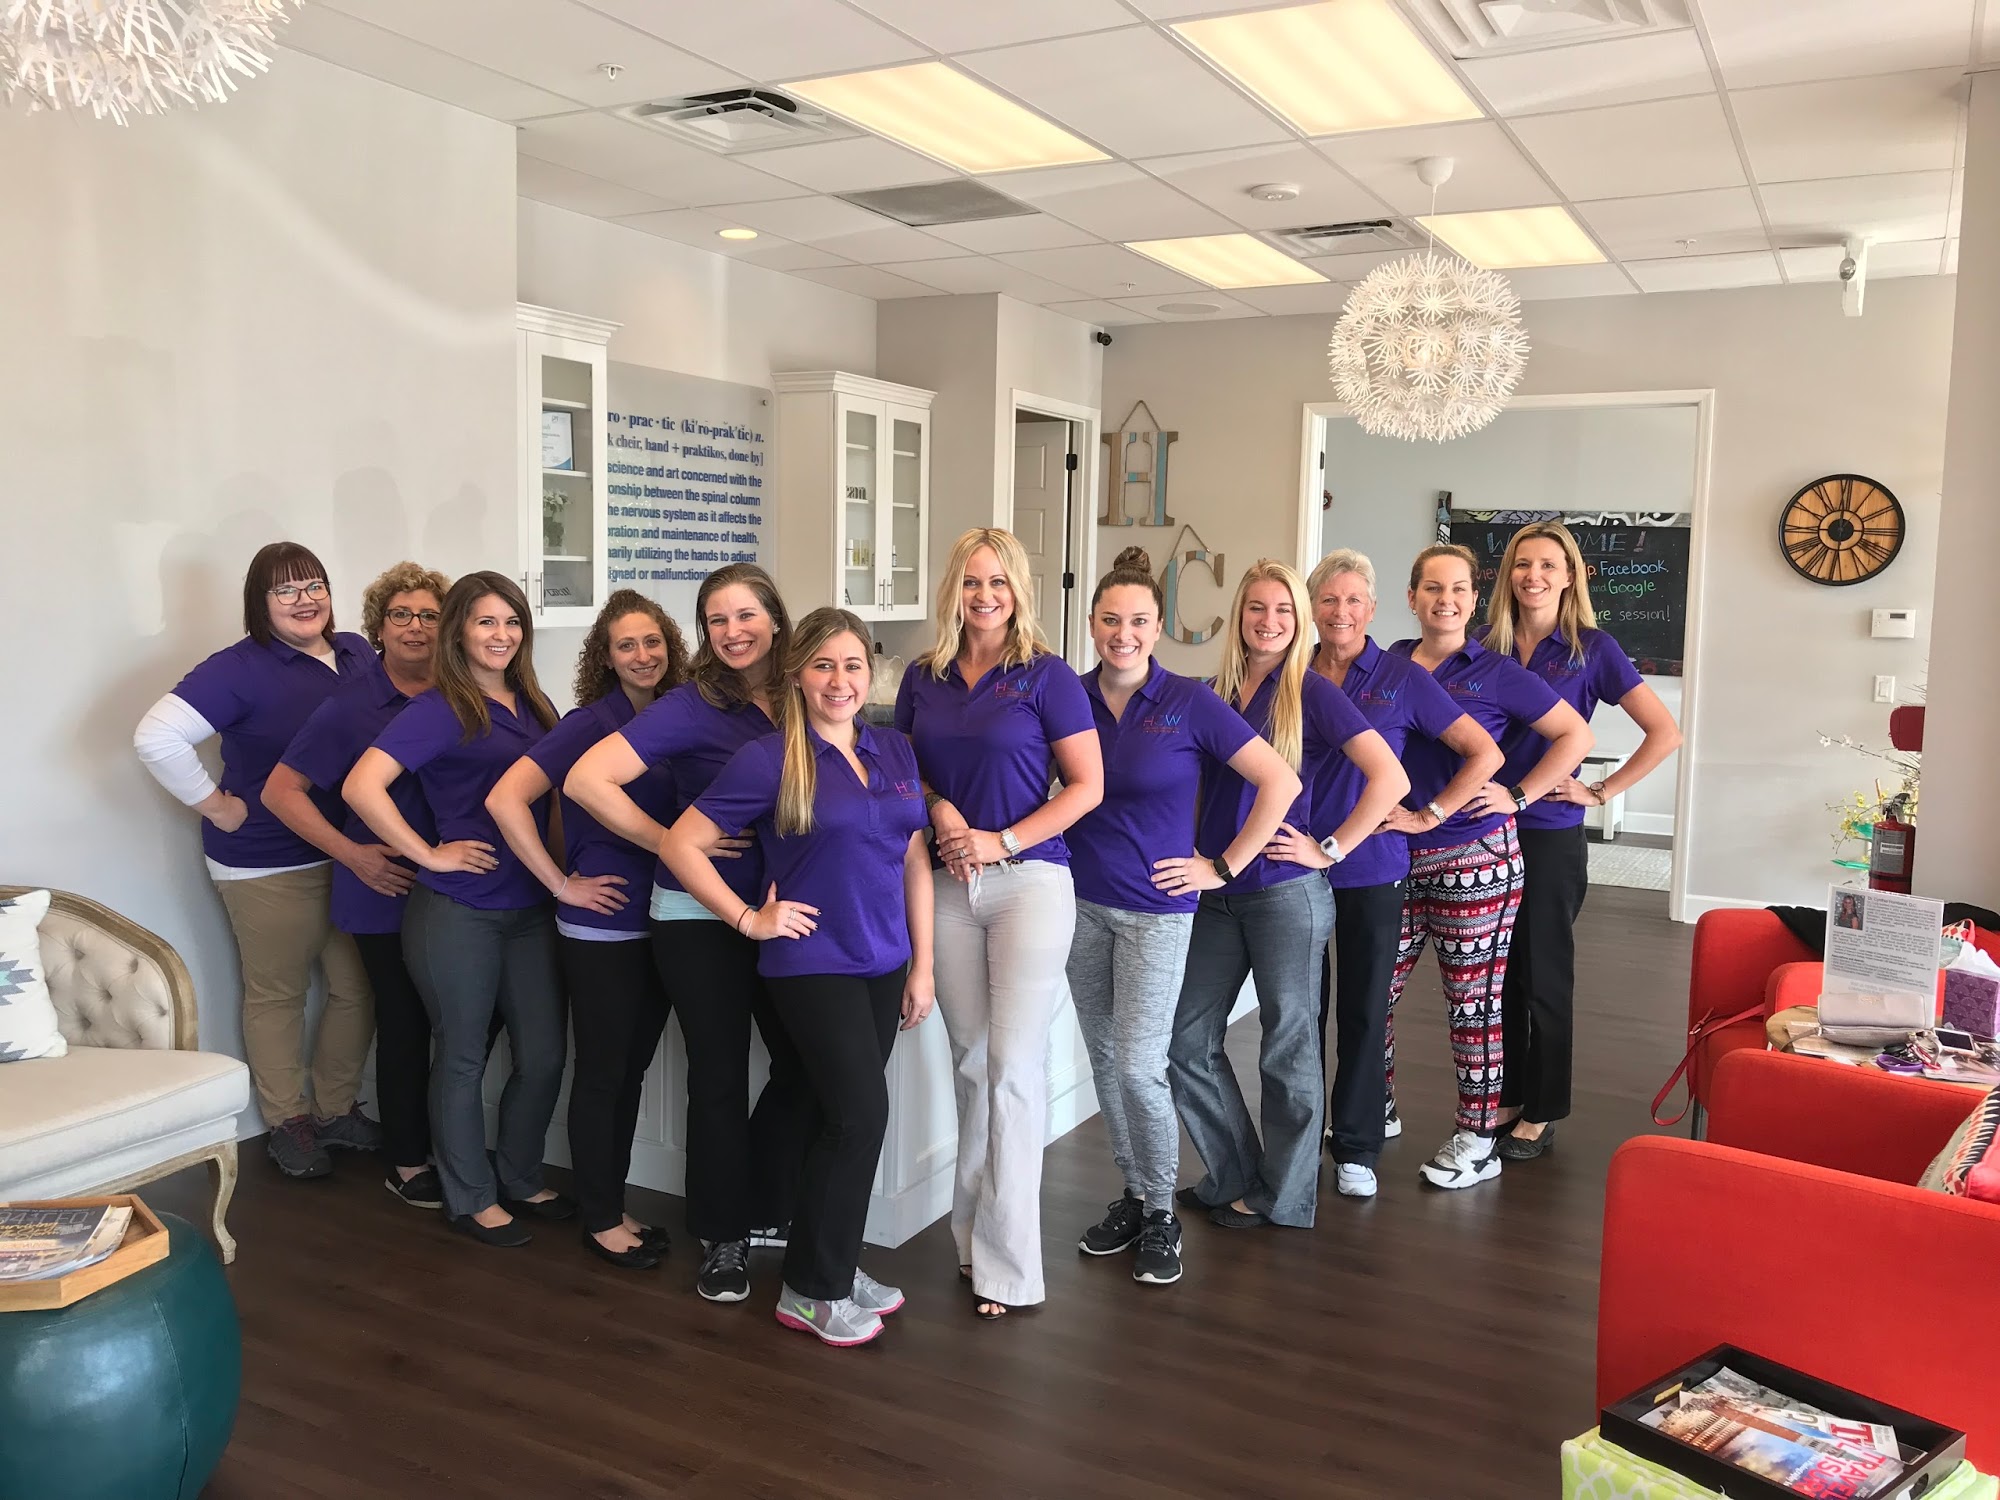 Hornback Chiropractic and Wellness, P.A.